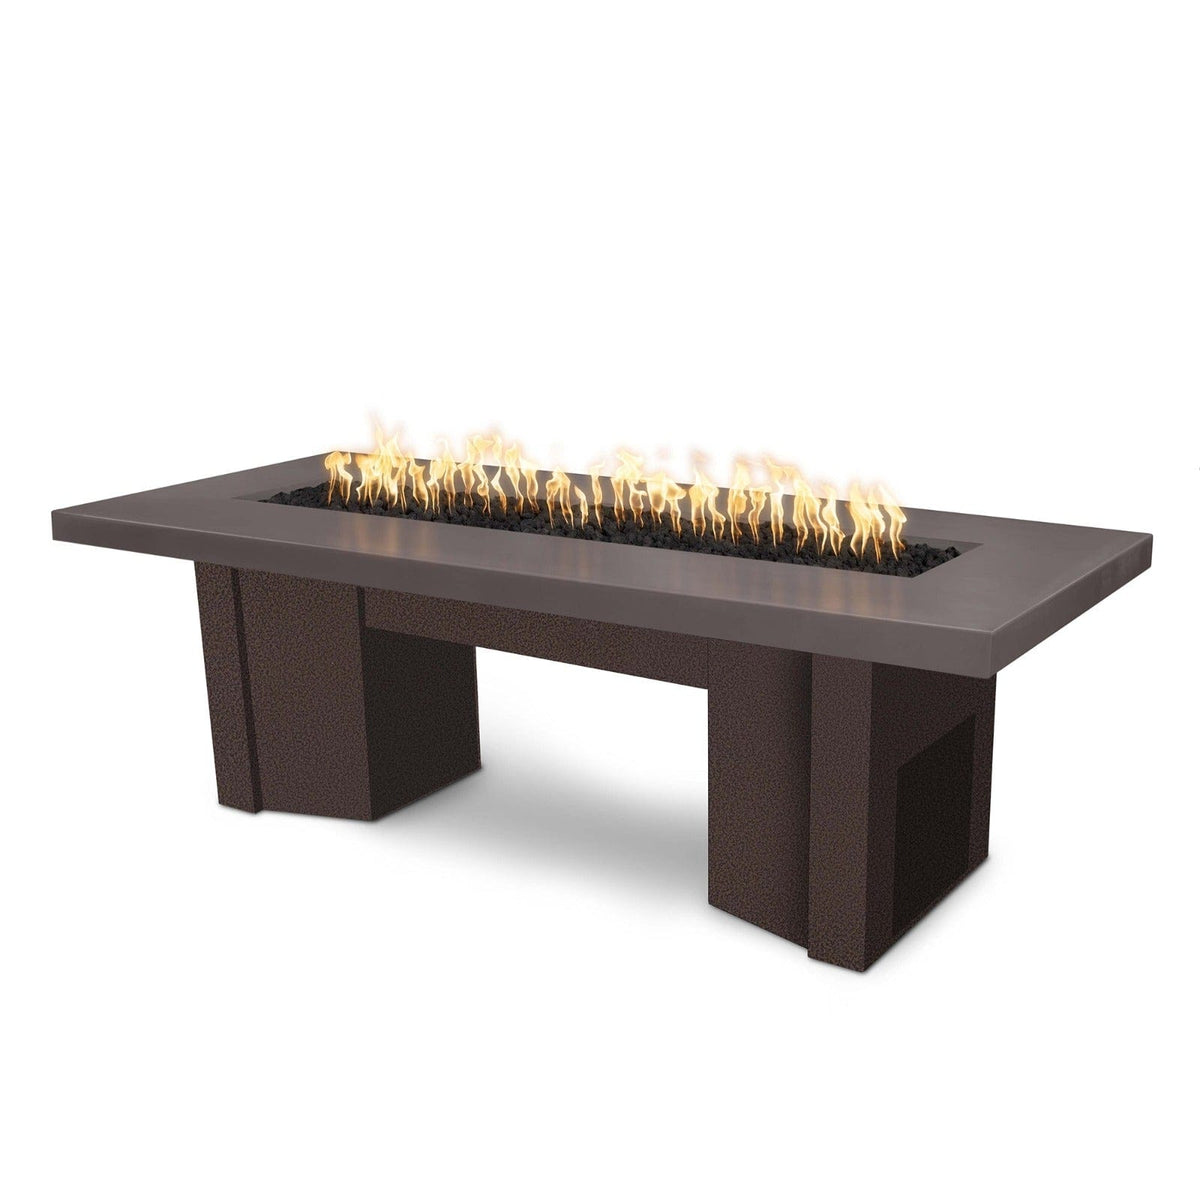 The Outdoor Plus Fire Features Chestnut (-CST) / Copper Vein Powder Coated Steel (-CPV) The Outdoor Plus 60&quot; Alameda Fire Table Smooth Concrete in Liquid Propane - Match Lit / OPT-ALMGFRC60-LP